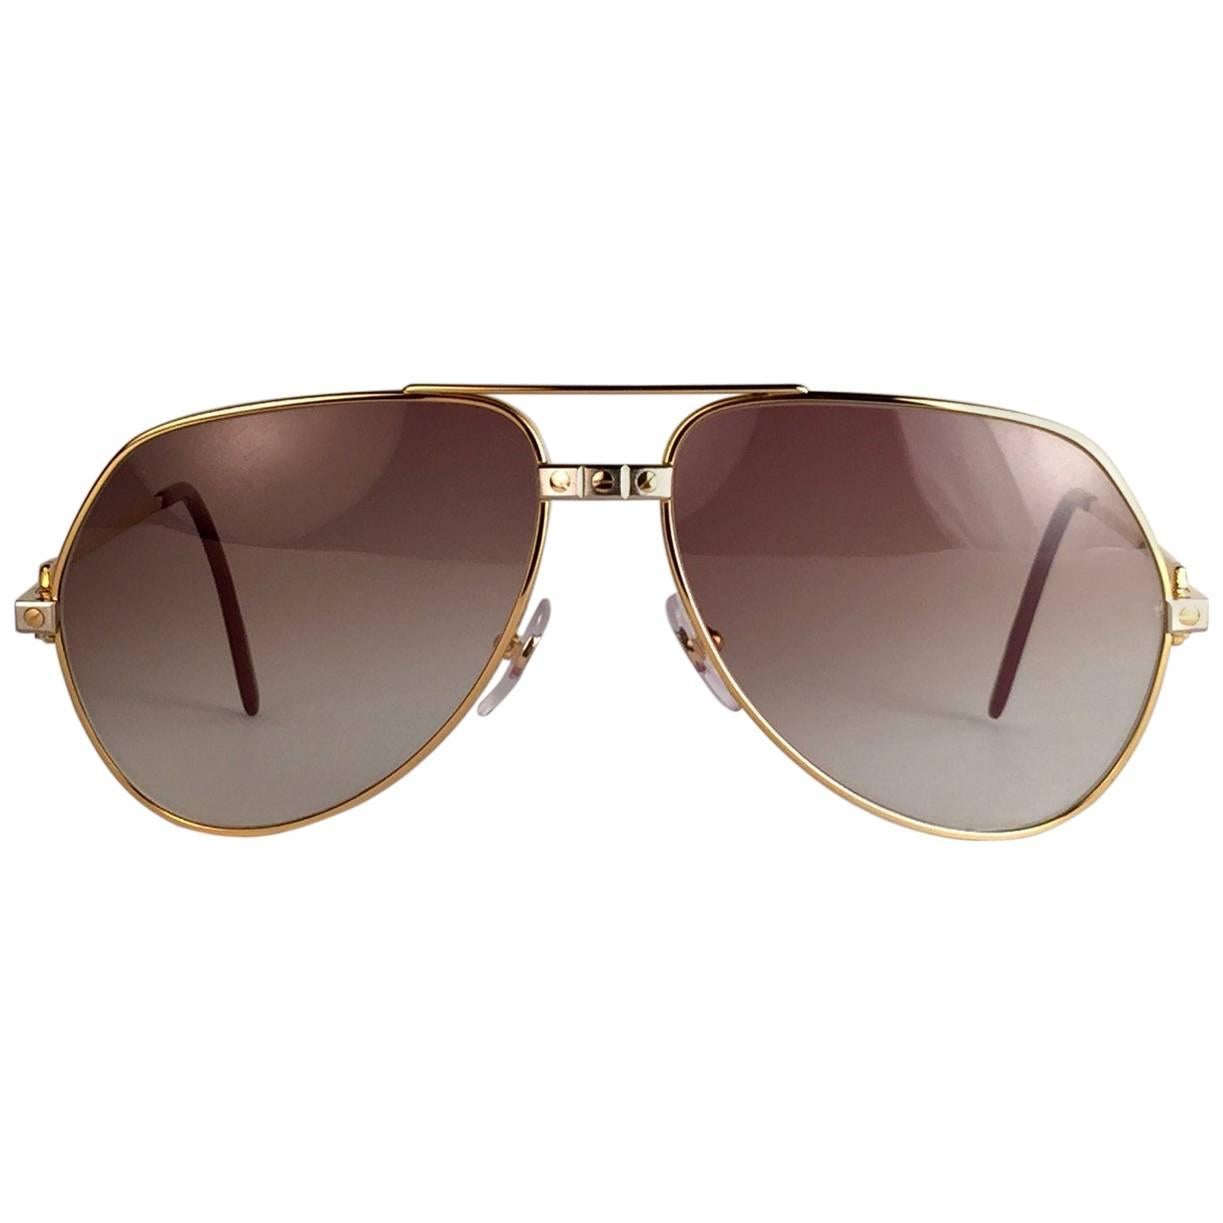 New from 1983!!! Cartier Aviator Santos Sunglasses with Brown Gradient (uv protection) Lenses. 
Frame is with the famous screws on the front and sides in yellow and white gold. All hallmarks. Red enamel with Cartier gold signs on the ear paddles.